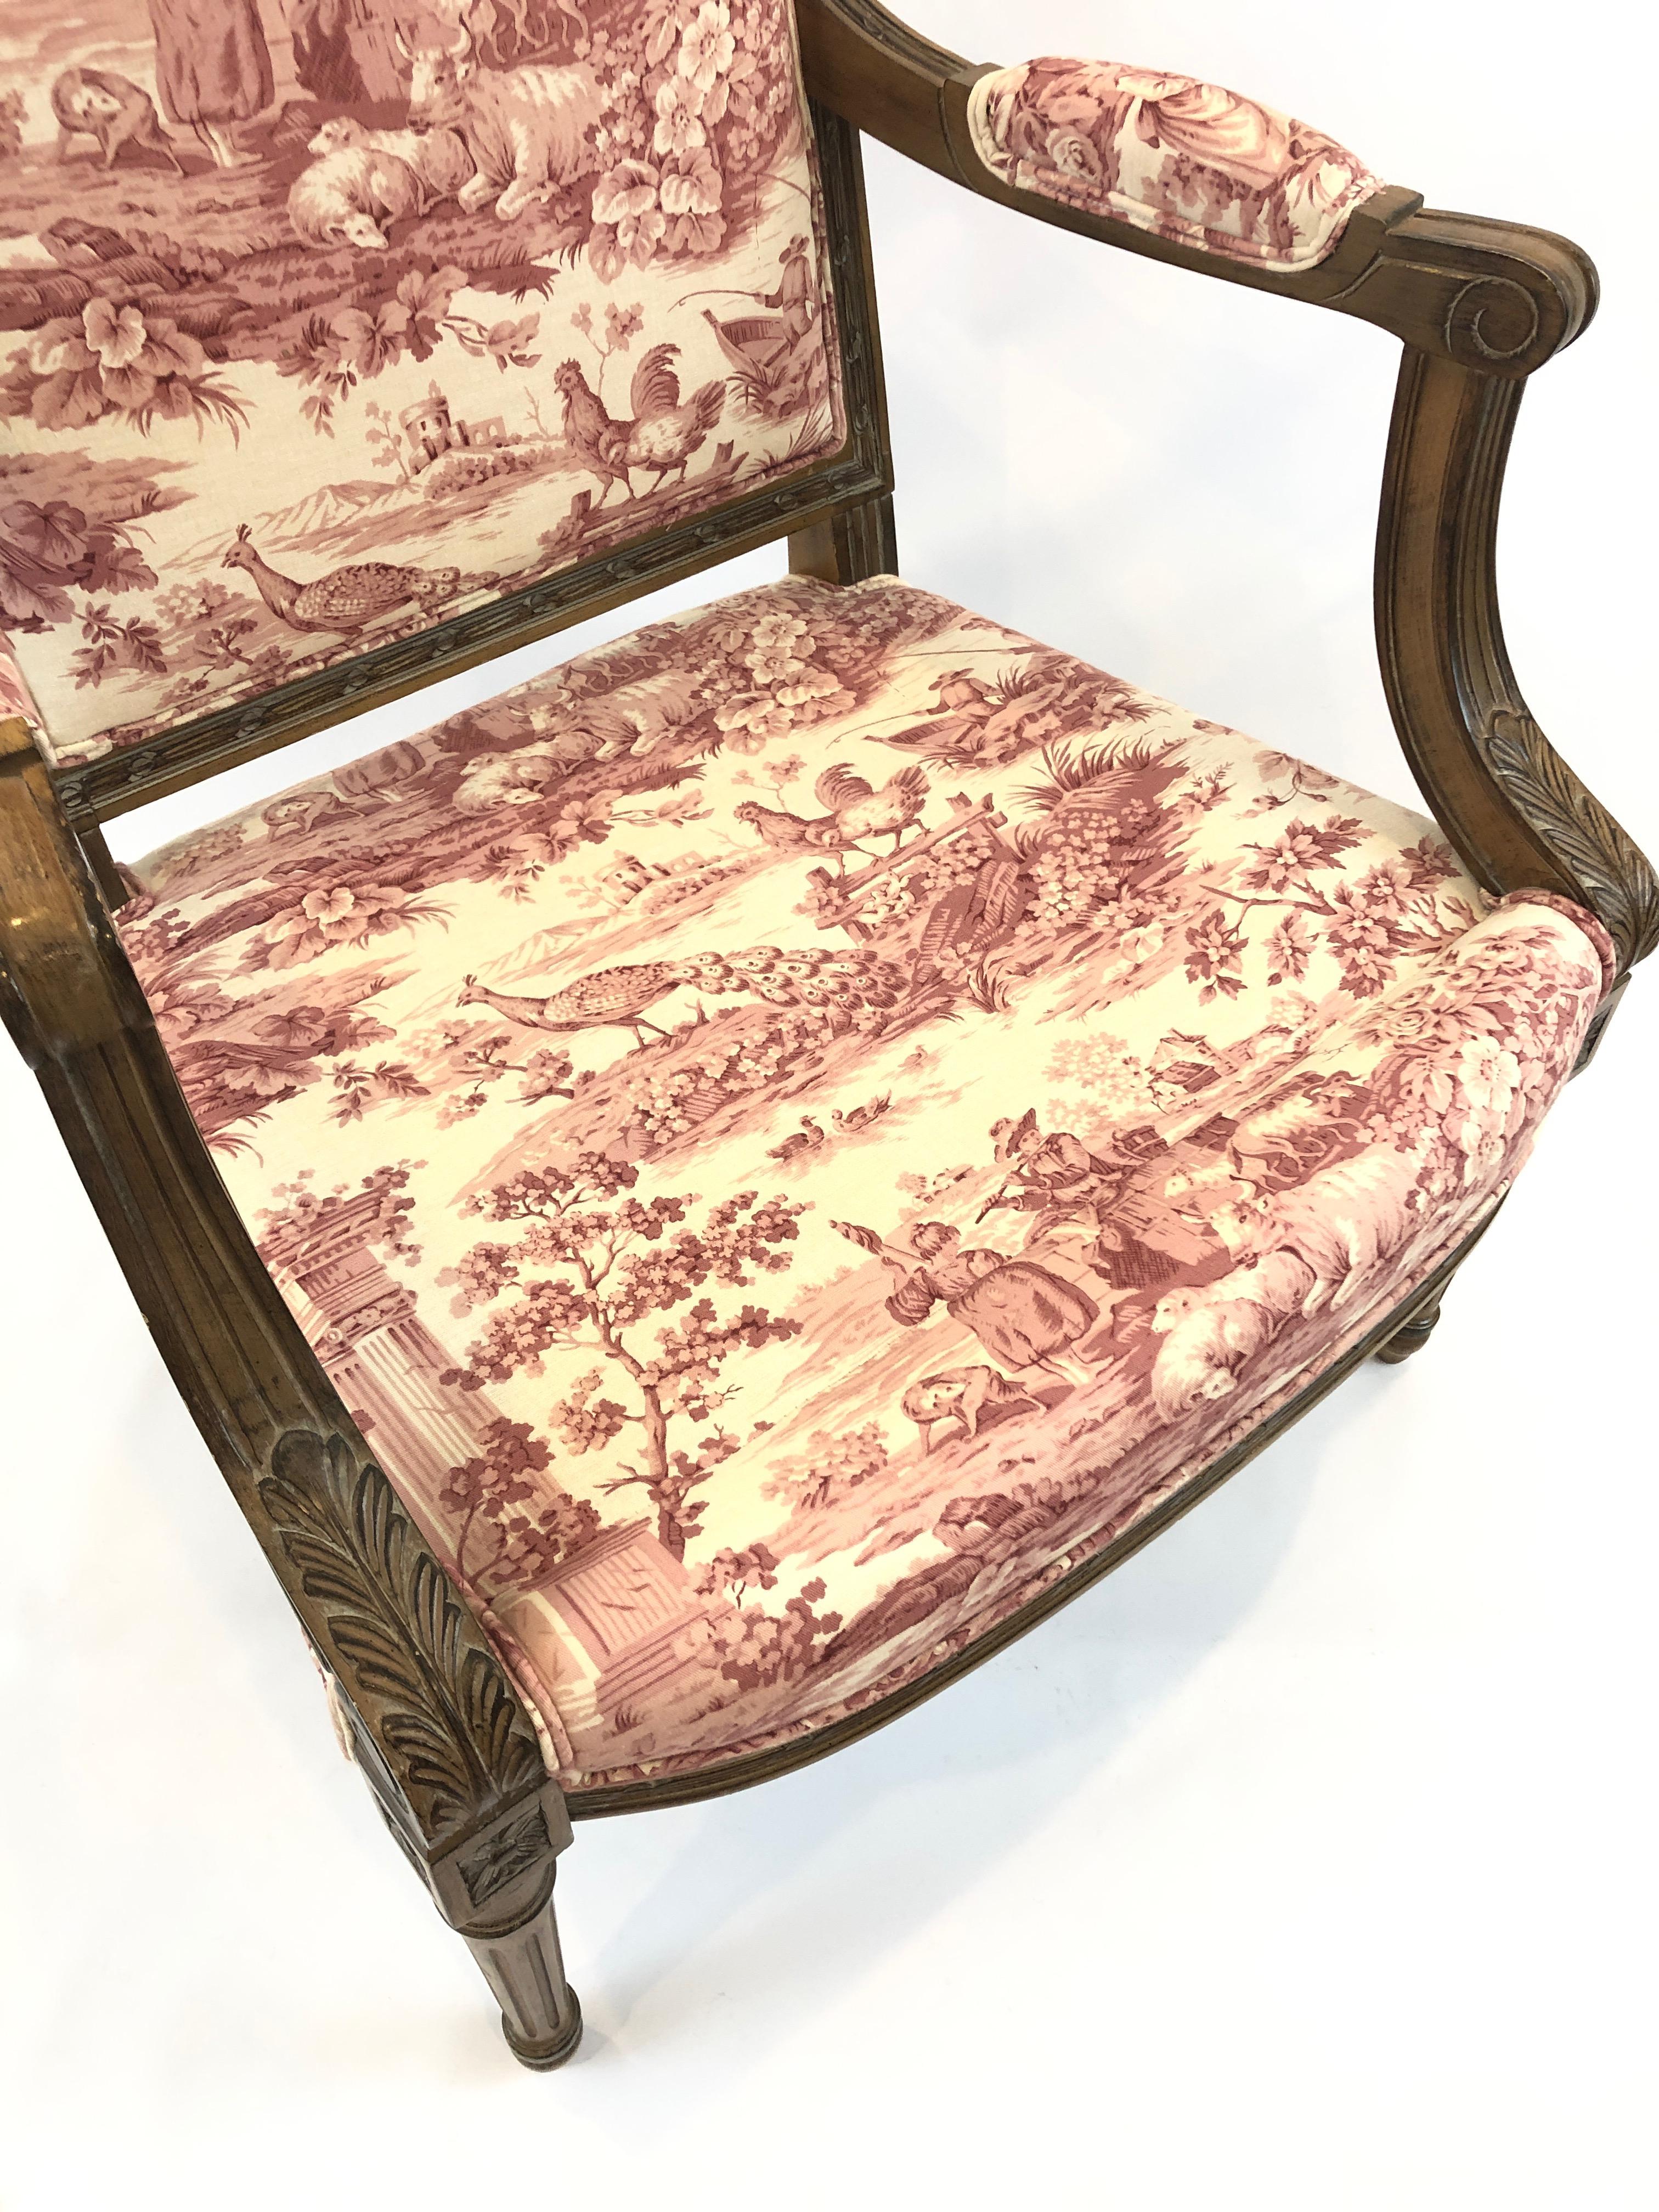 Late 20th Century Regal Provencal Carved Fruitwood and Toile Upholstered Armchair